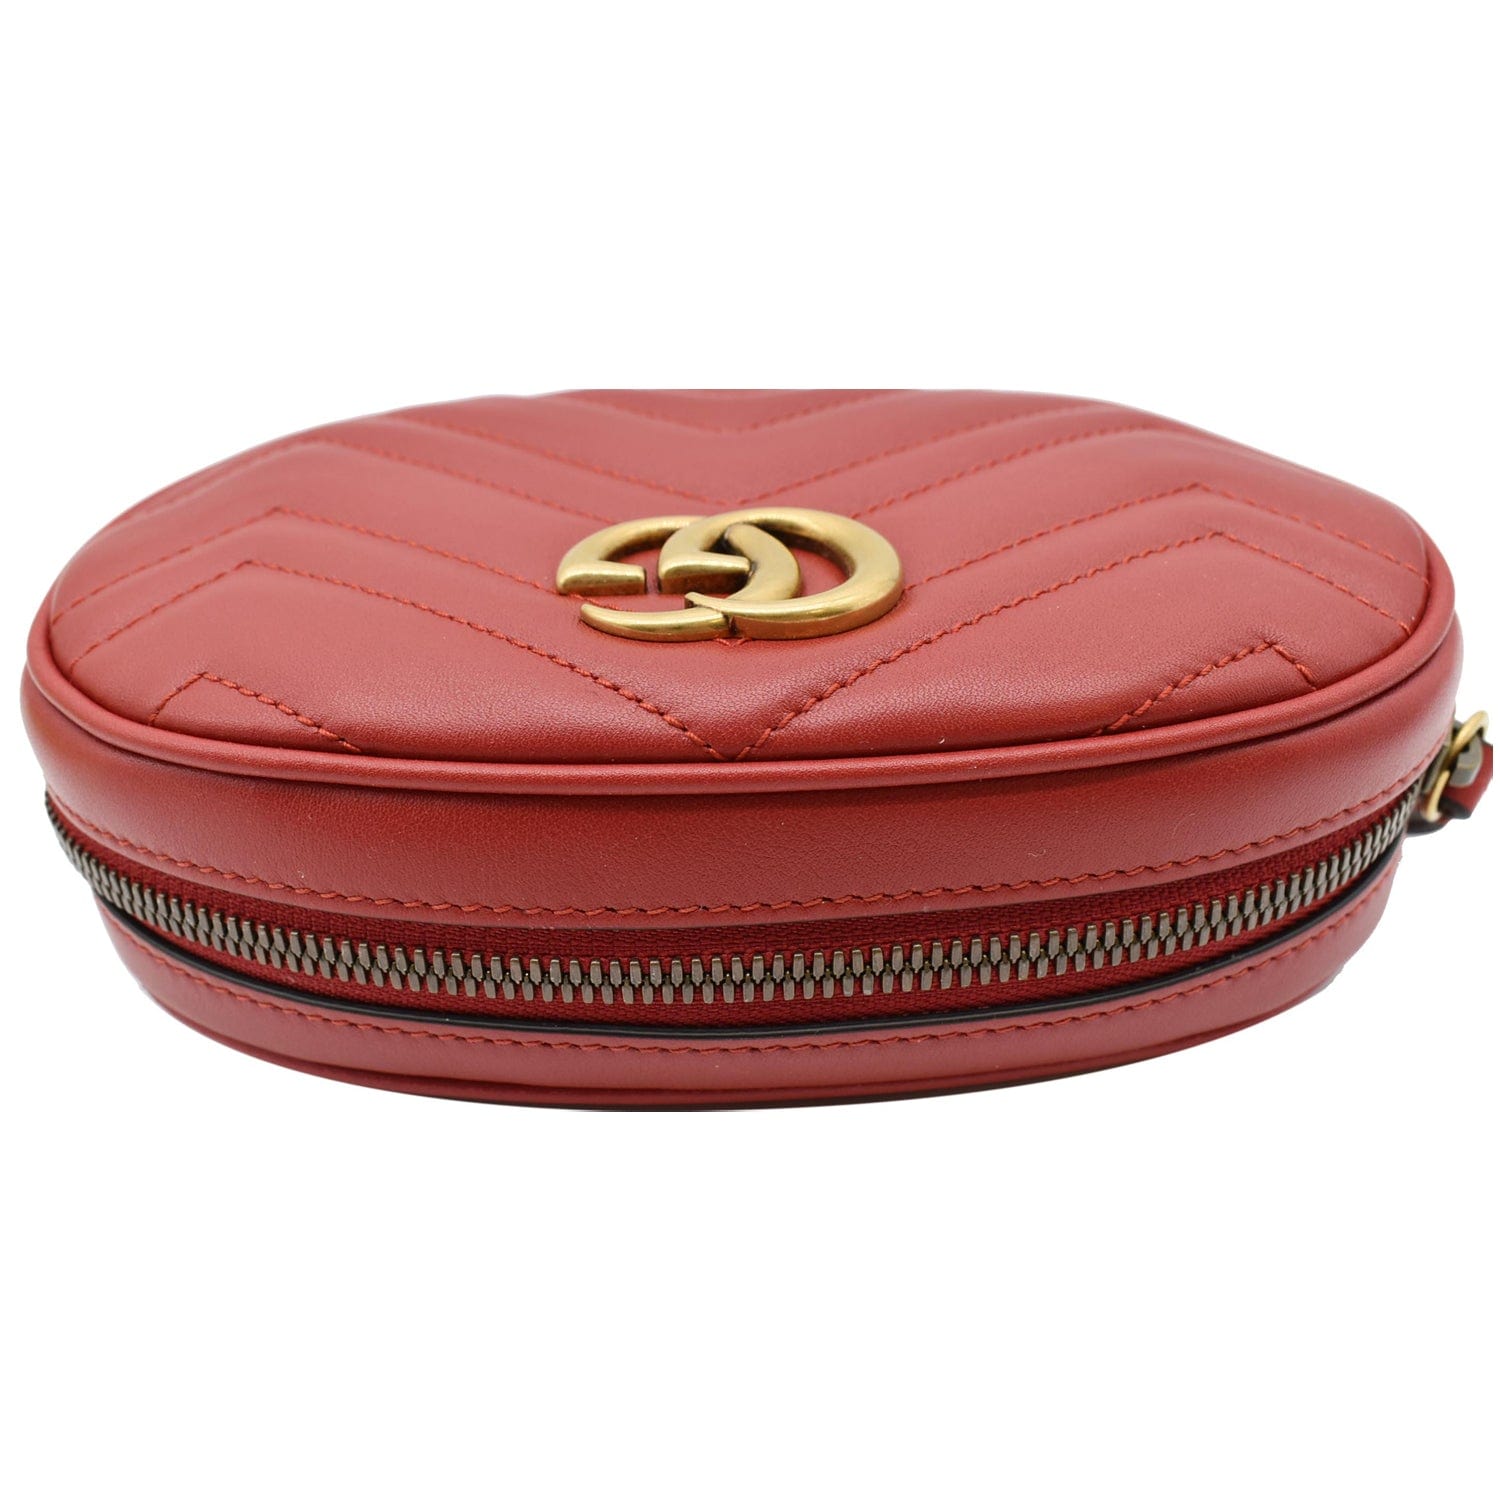 Gucci GG Marmont Matelasse Leather Belt Bag Red - Shop Now